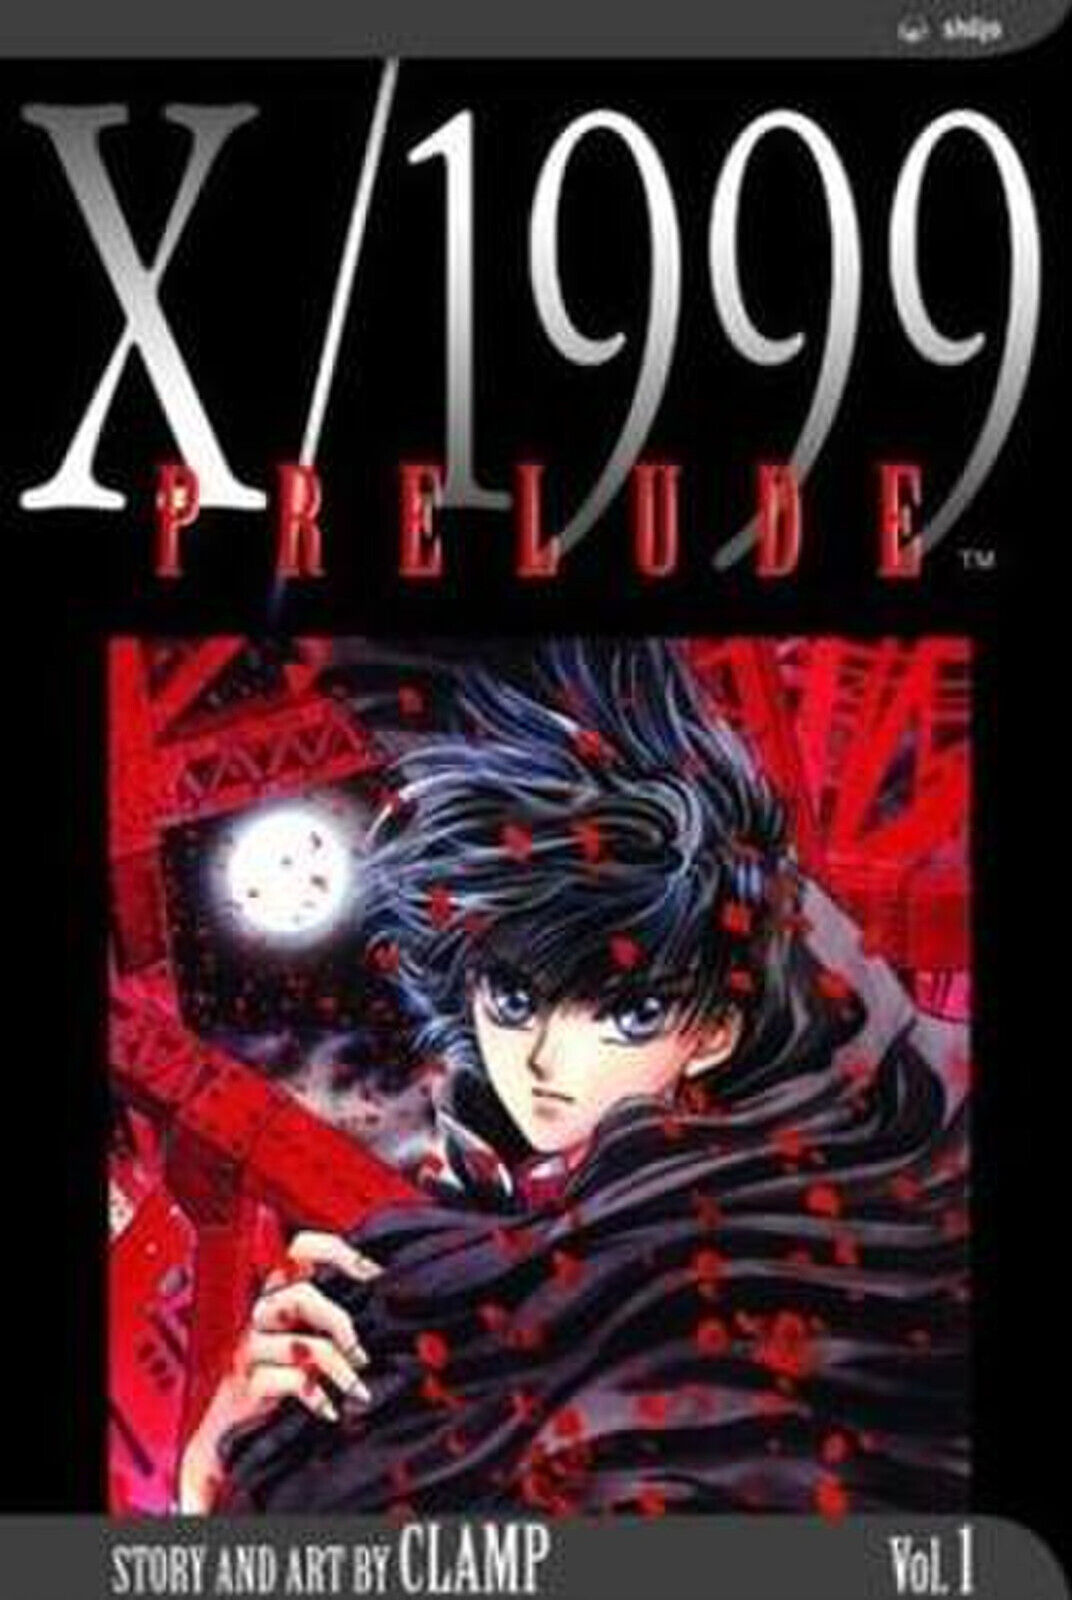 X/1999, Vol. 1, Prelude by CLAMP - Brand New, 